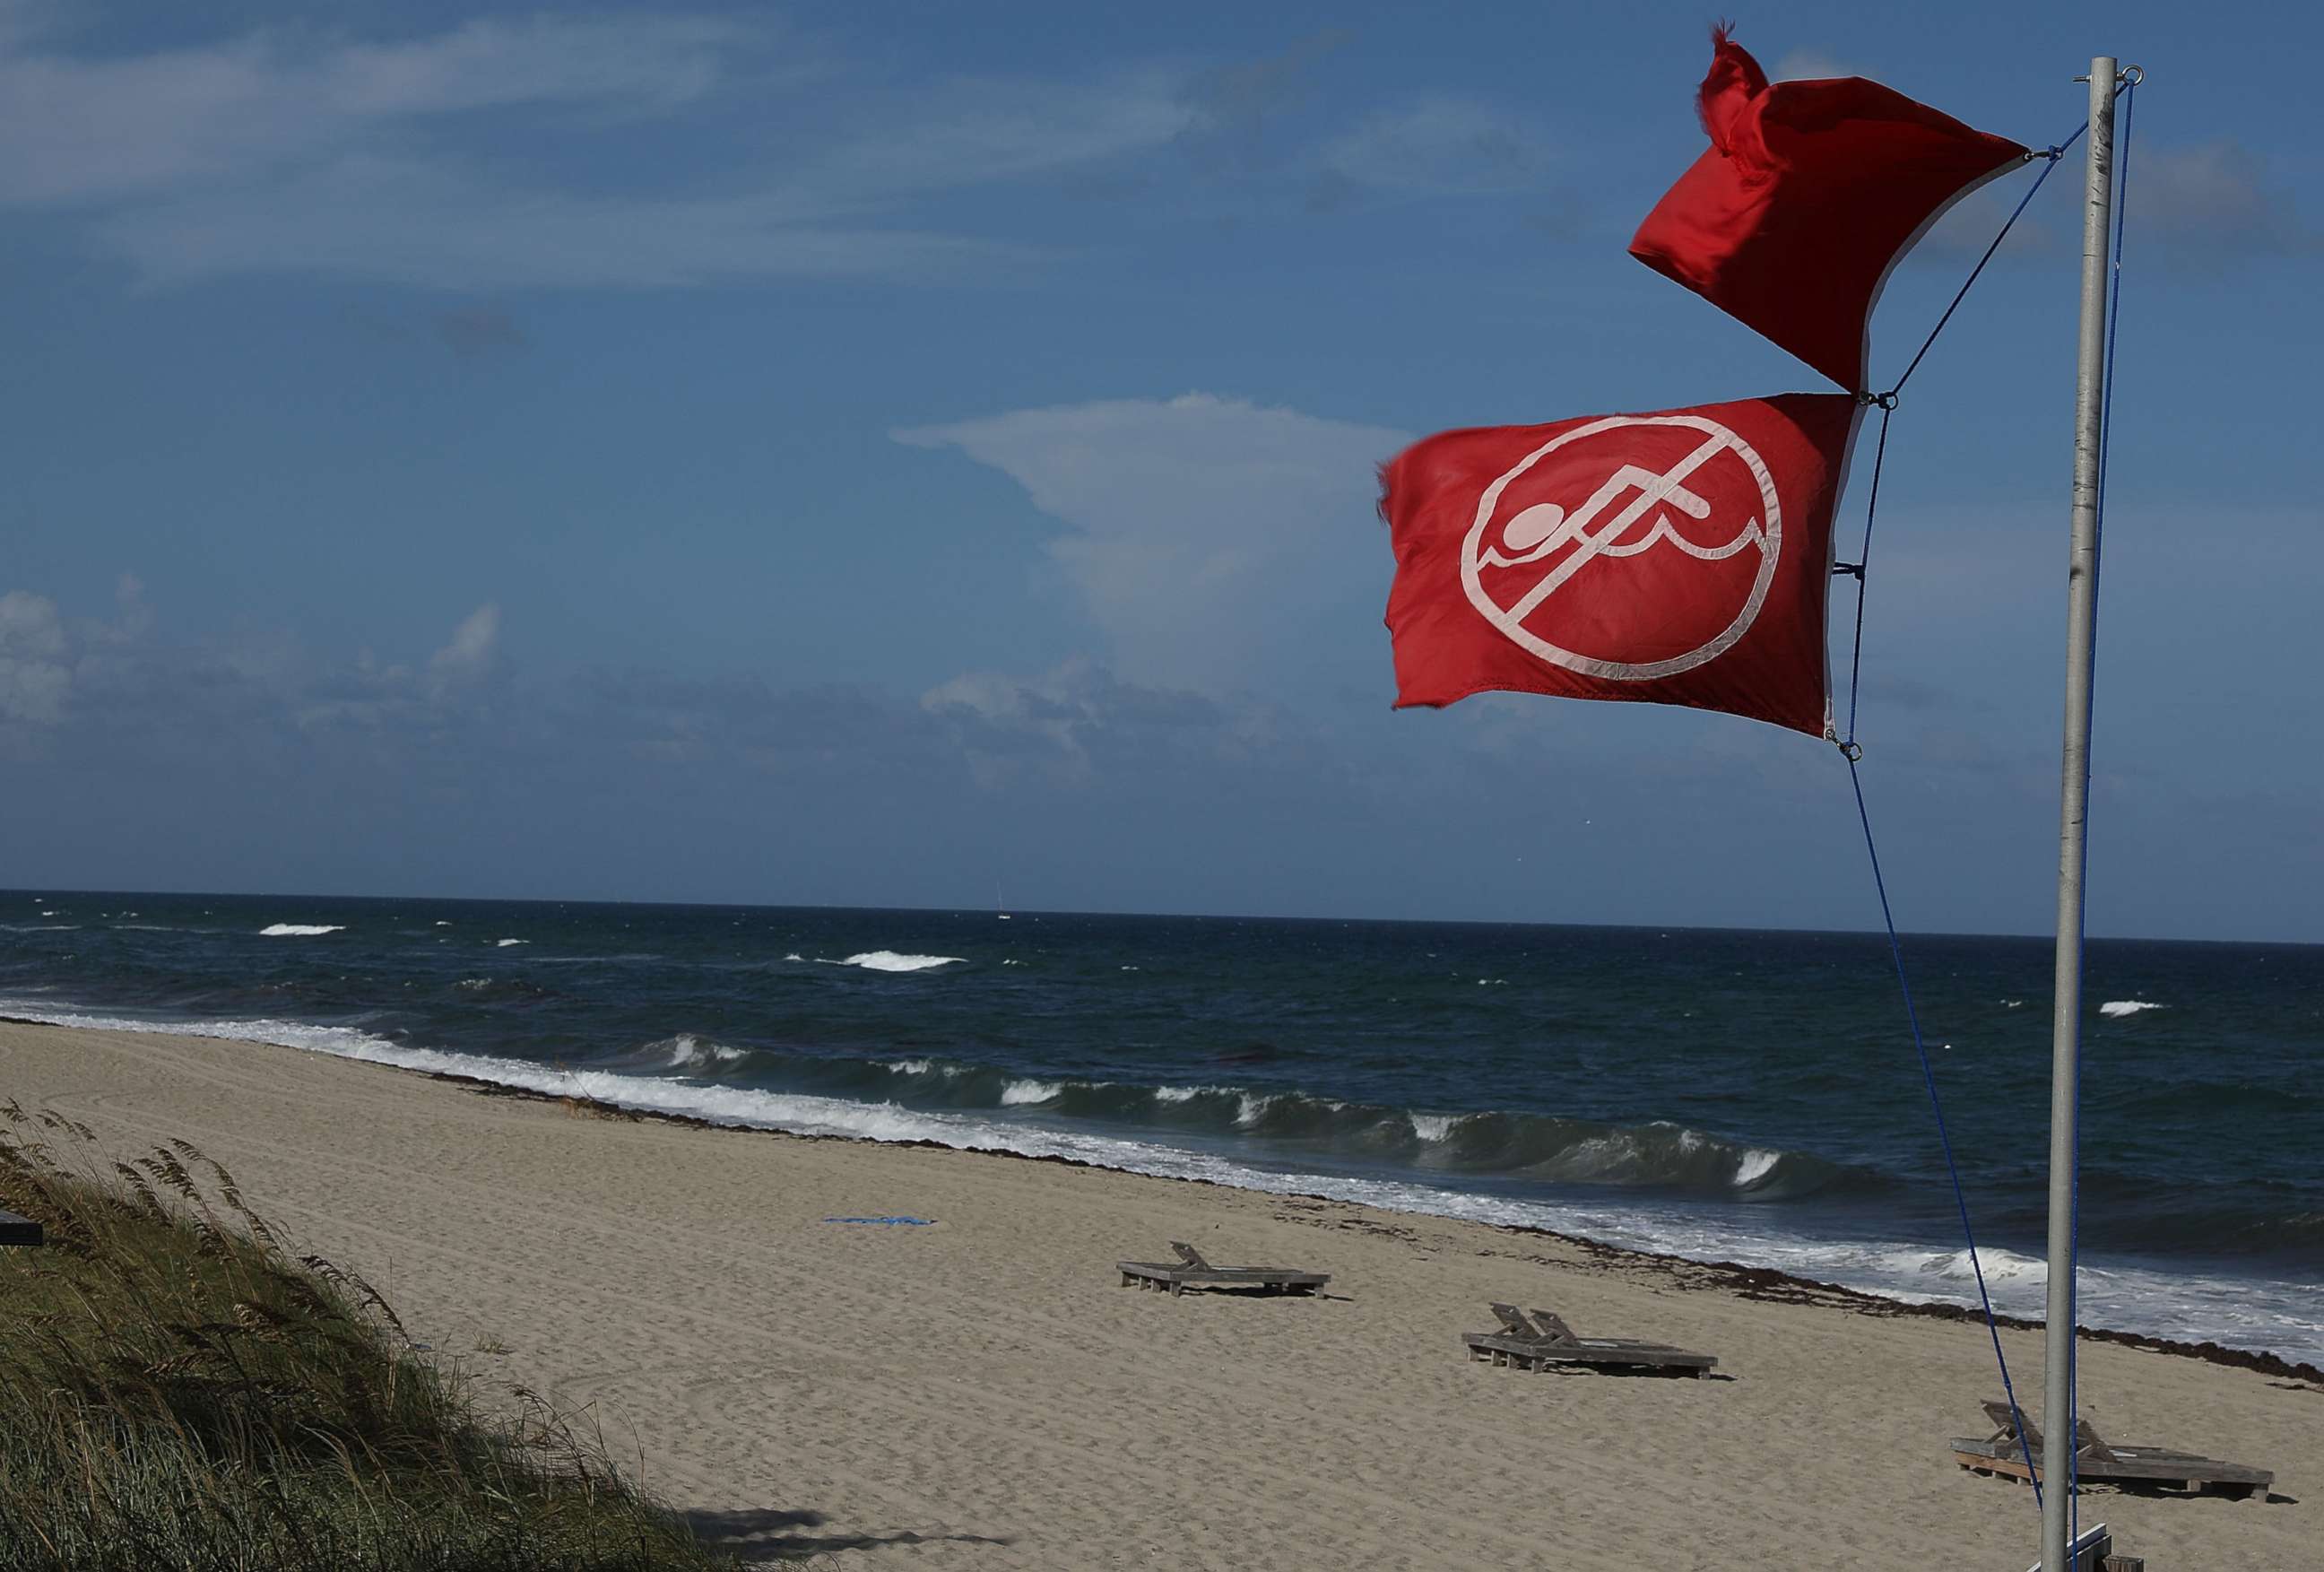 PHOTO: A lifeguards' no swimming flag flies above a beach as Palm Beach County as officials announced that all county beaches are closed due to red tide affecting coastal areas on Oct. 4, 2018 in Lake Worth, Fla.